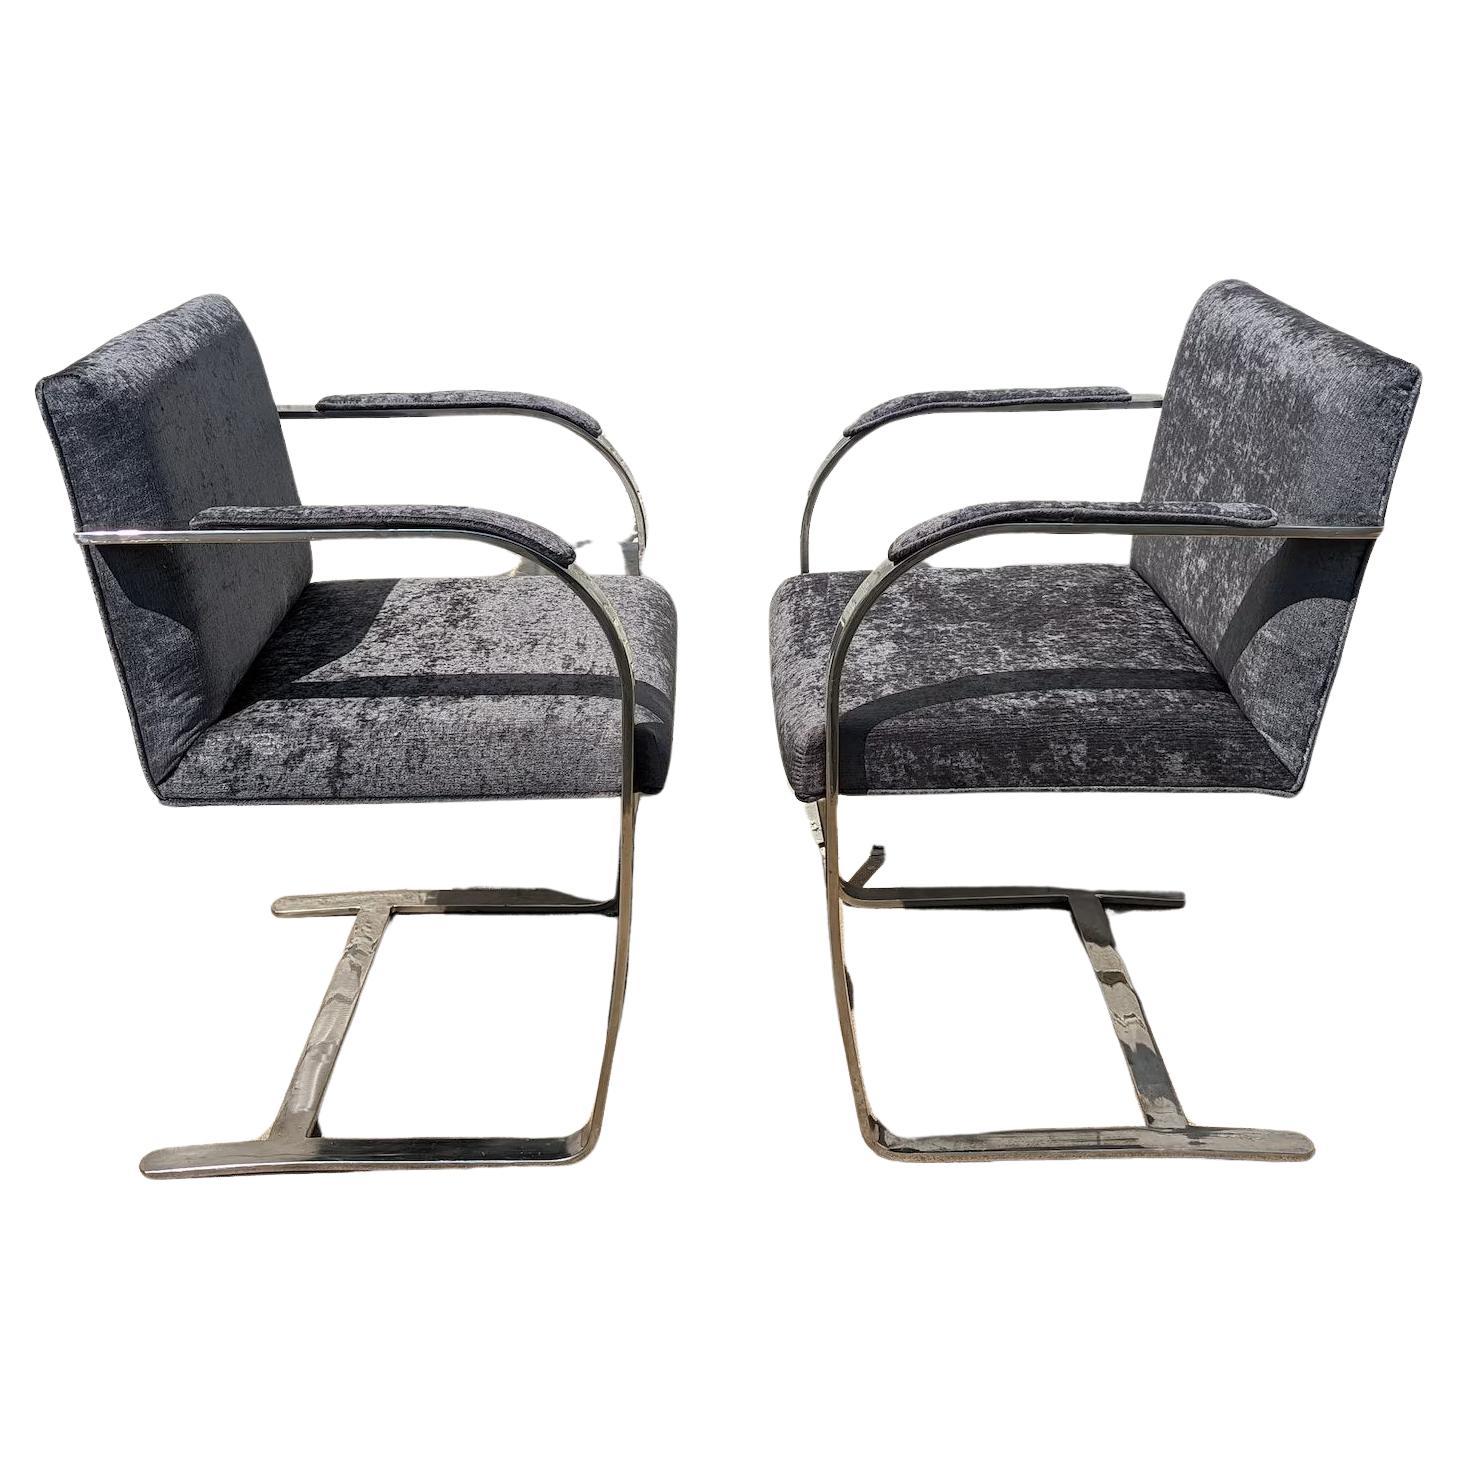 Pair of Mid Century Modern Mies Van Der Rohe Flatbar Chairs For Sale